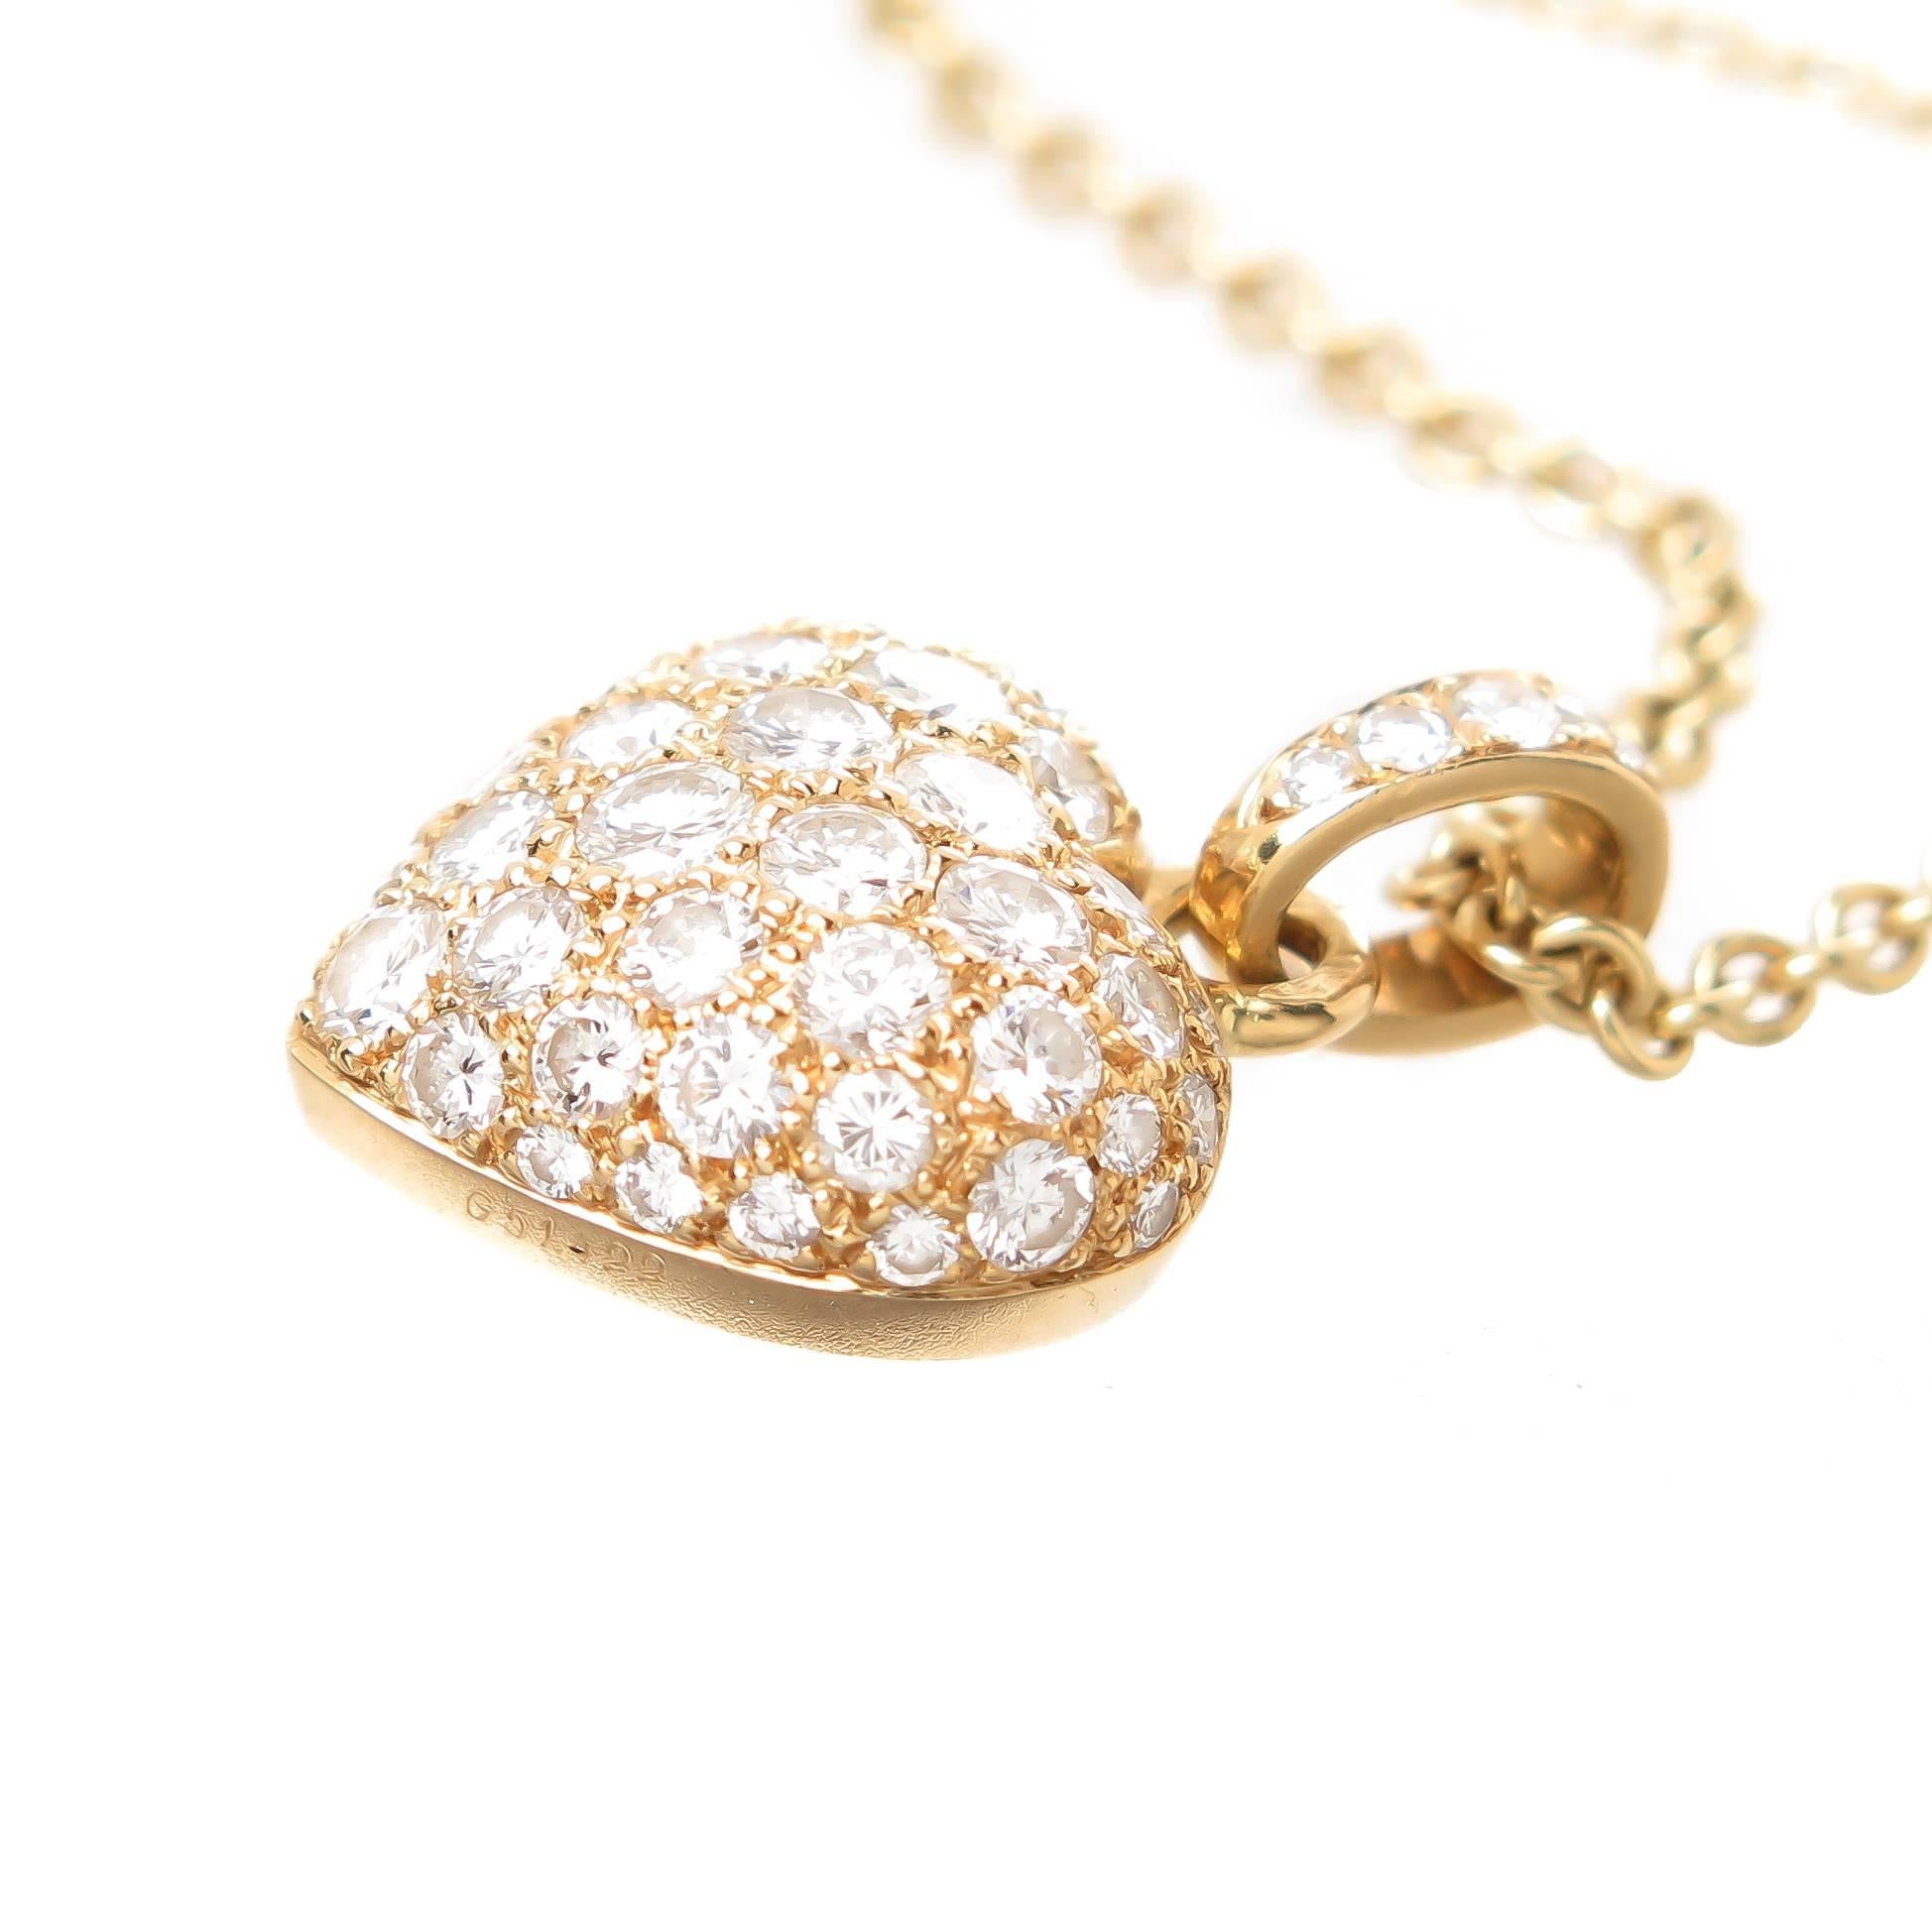 Circa 2010 Cartier Heart Pendant 18K yellow Gold and measuring 3/4 X 1/2 inch, set with very fine White Round brilliant cut Diamonds totaling approximately 1.40 carats. Suspended from a Cartier 18k yellow Gold link chain measuring 17 inch and is